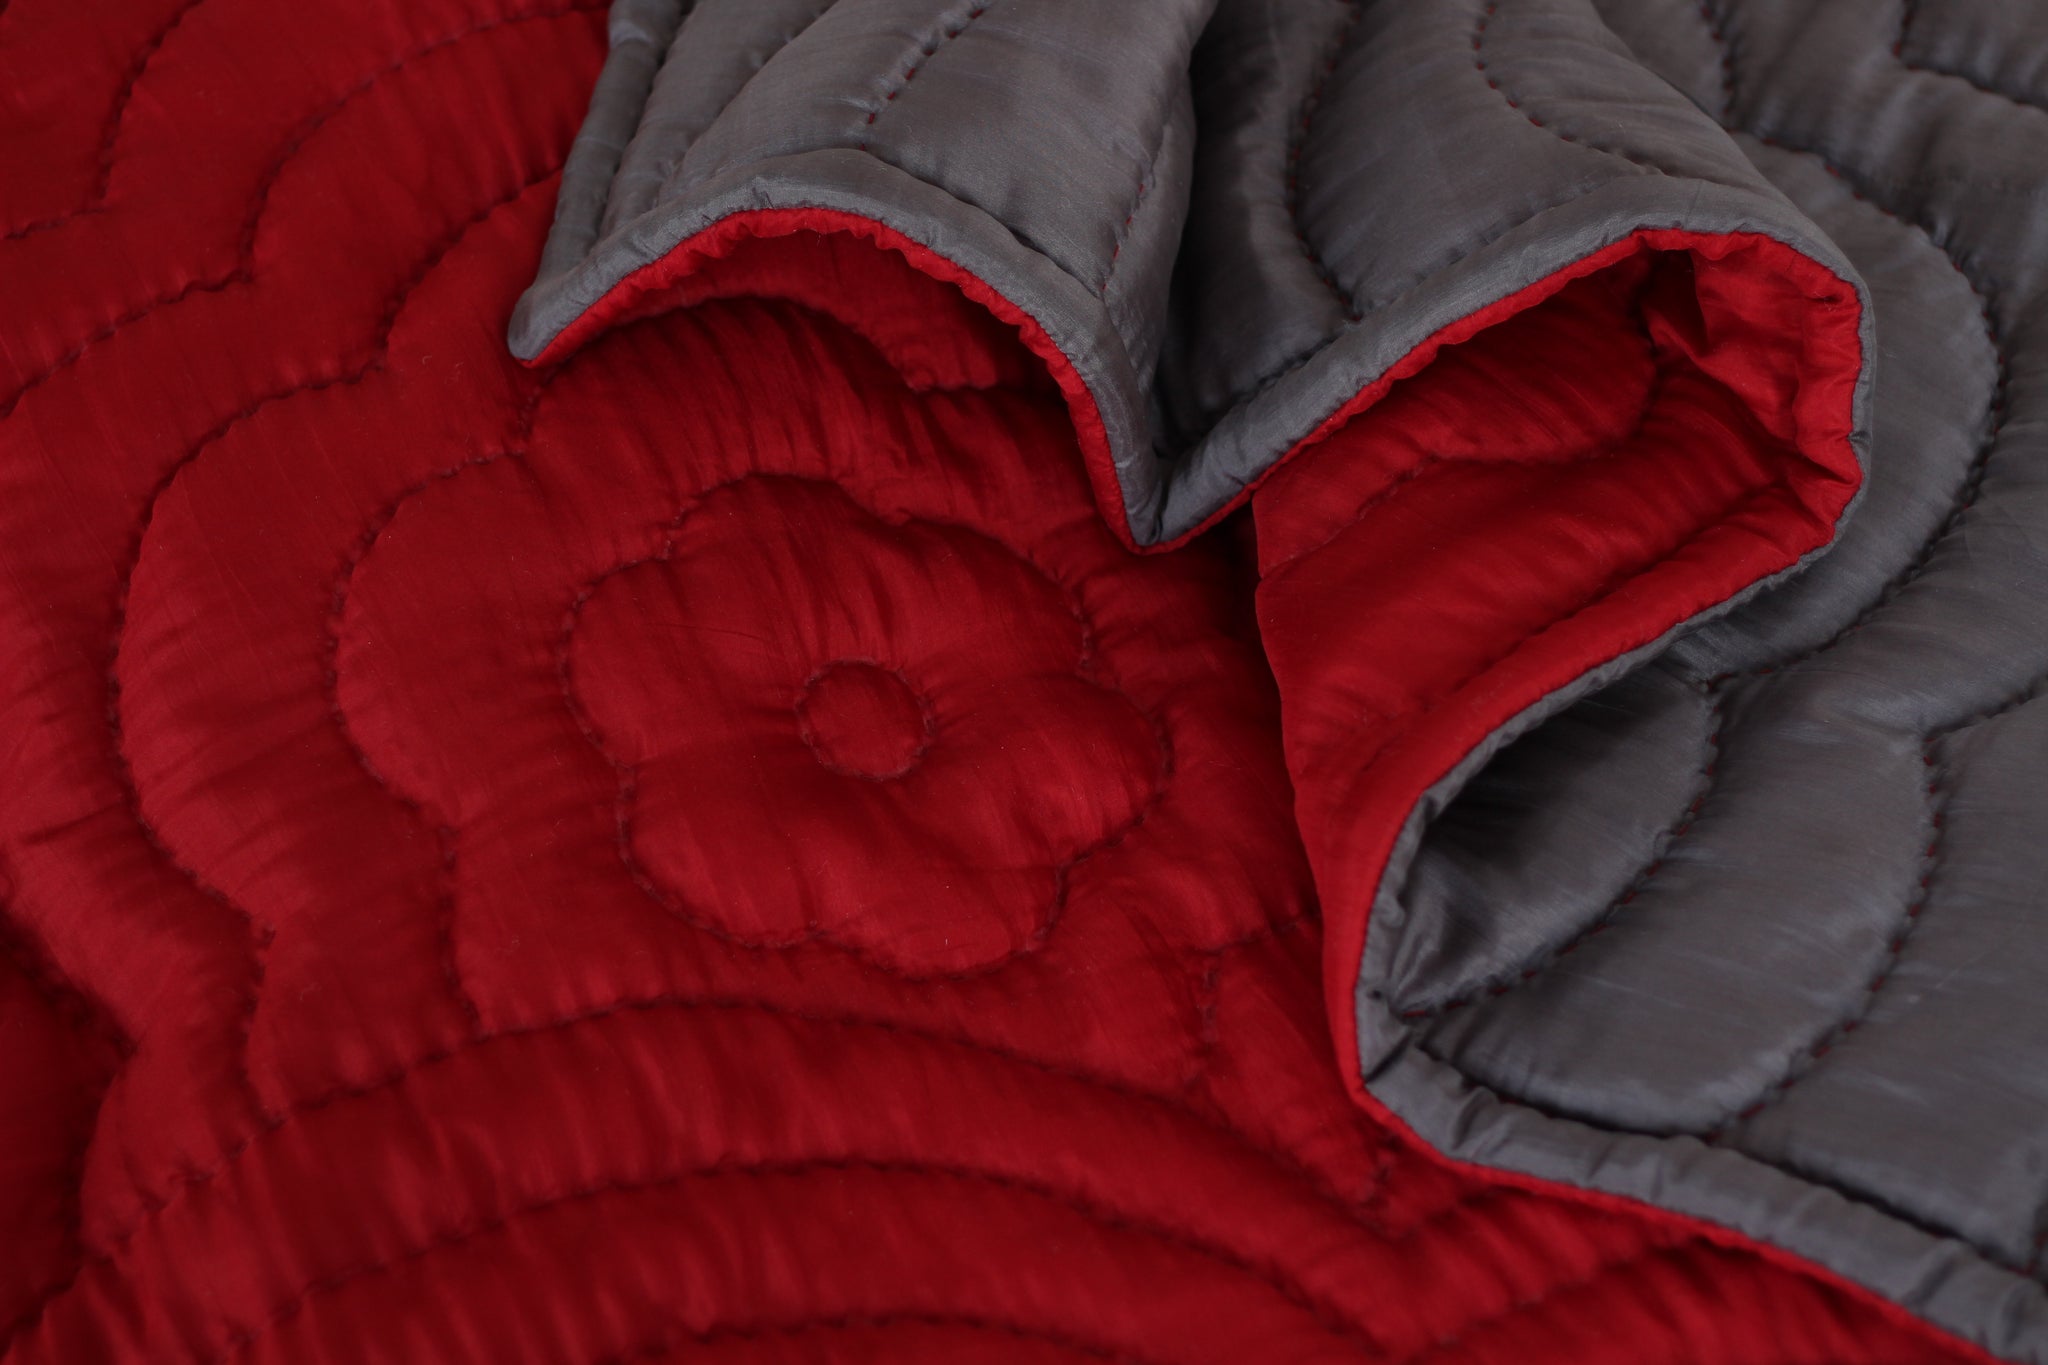 Mulberry Silk Bedding Set - Quilt and Shams Set-Blossom Hand Stitching-Red